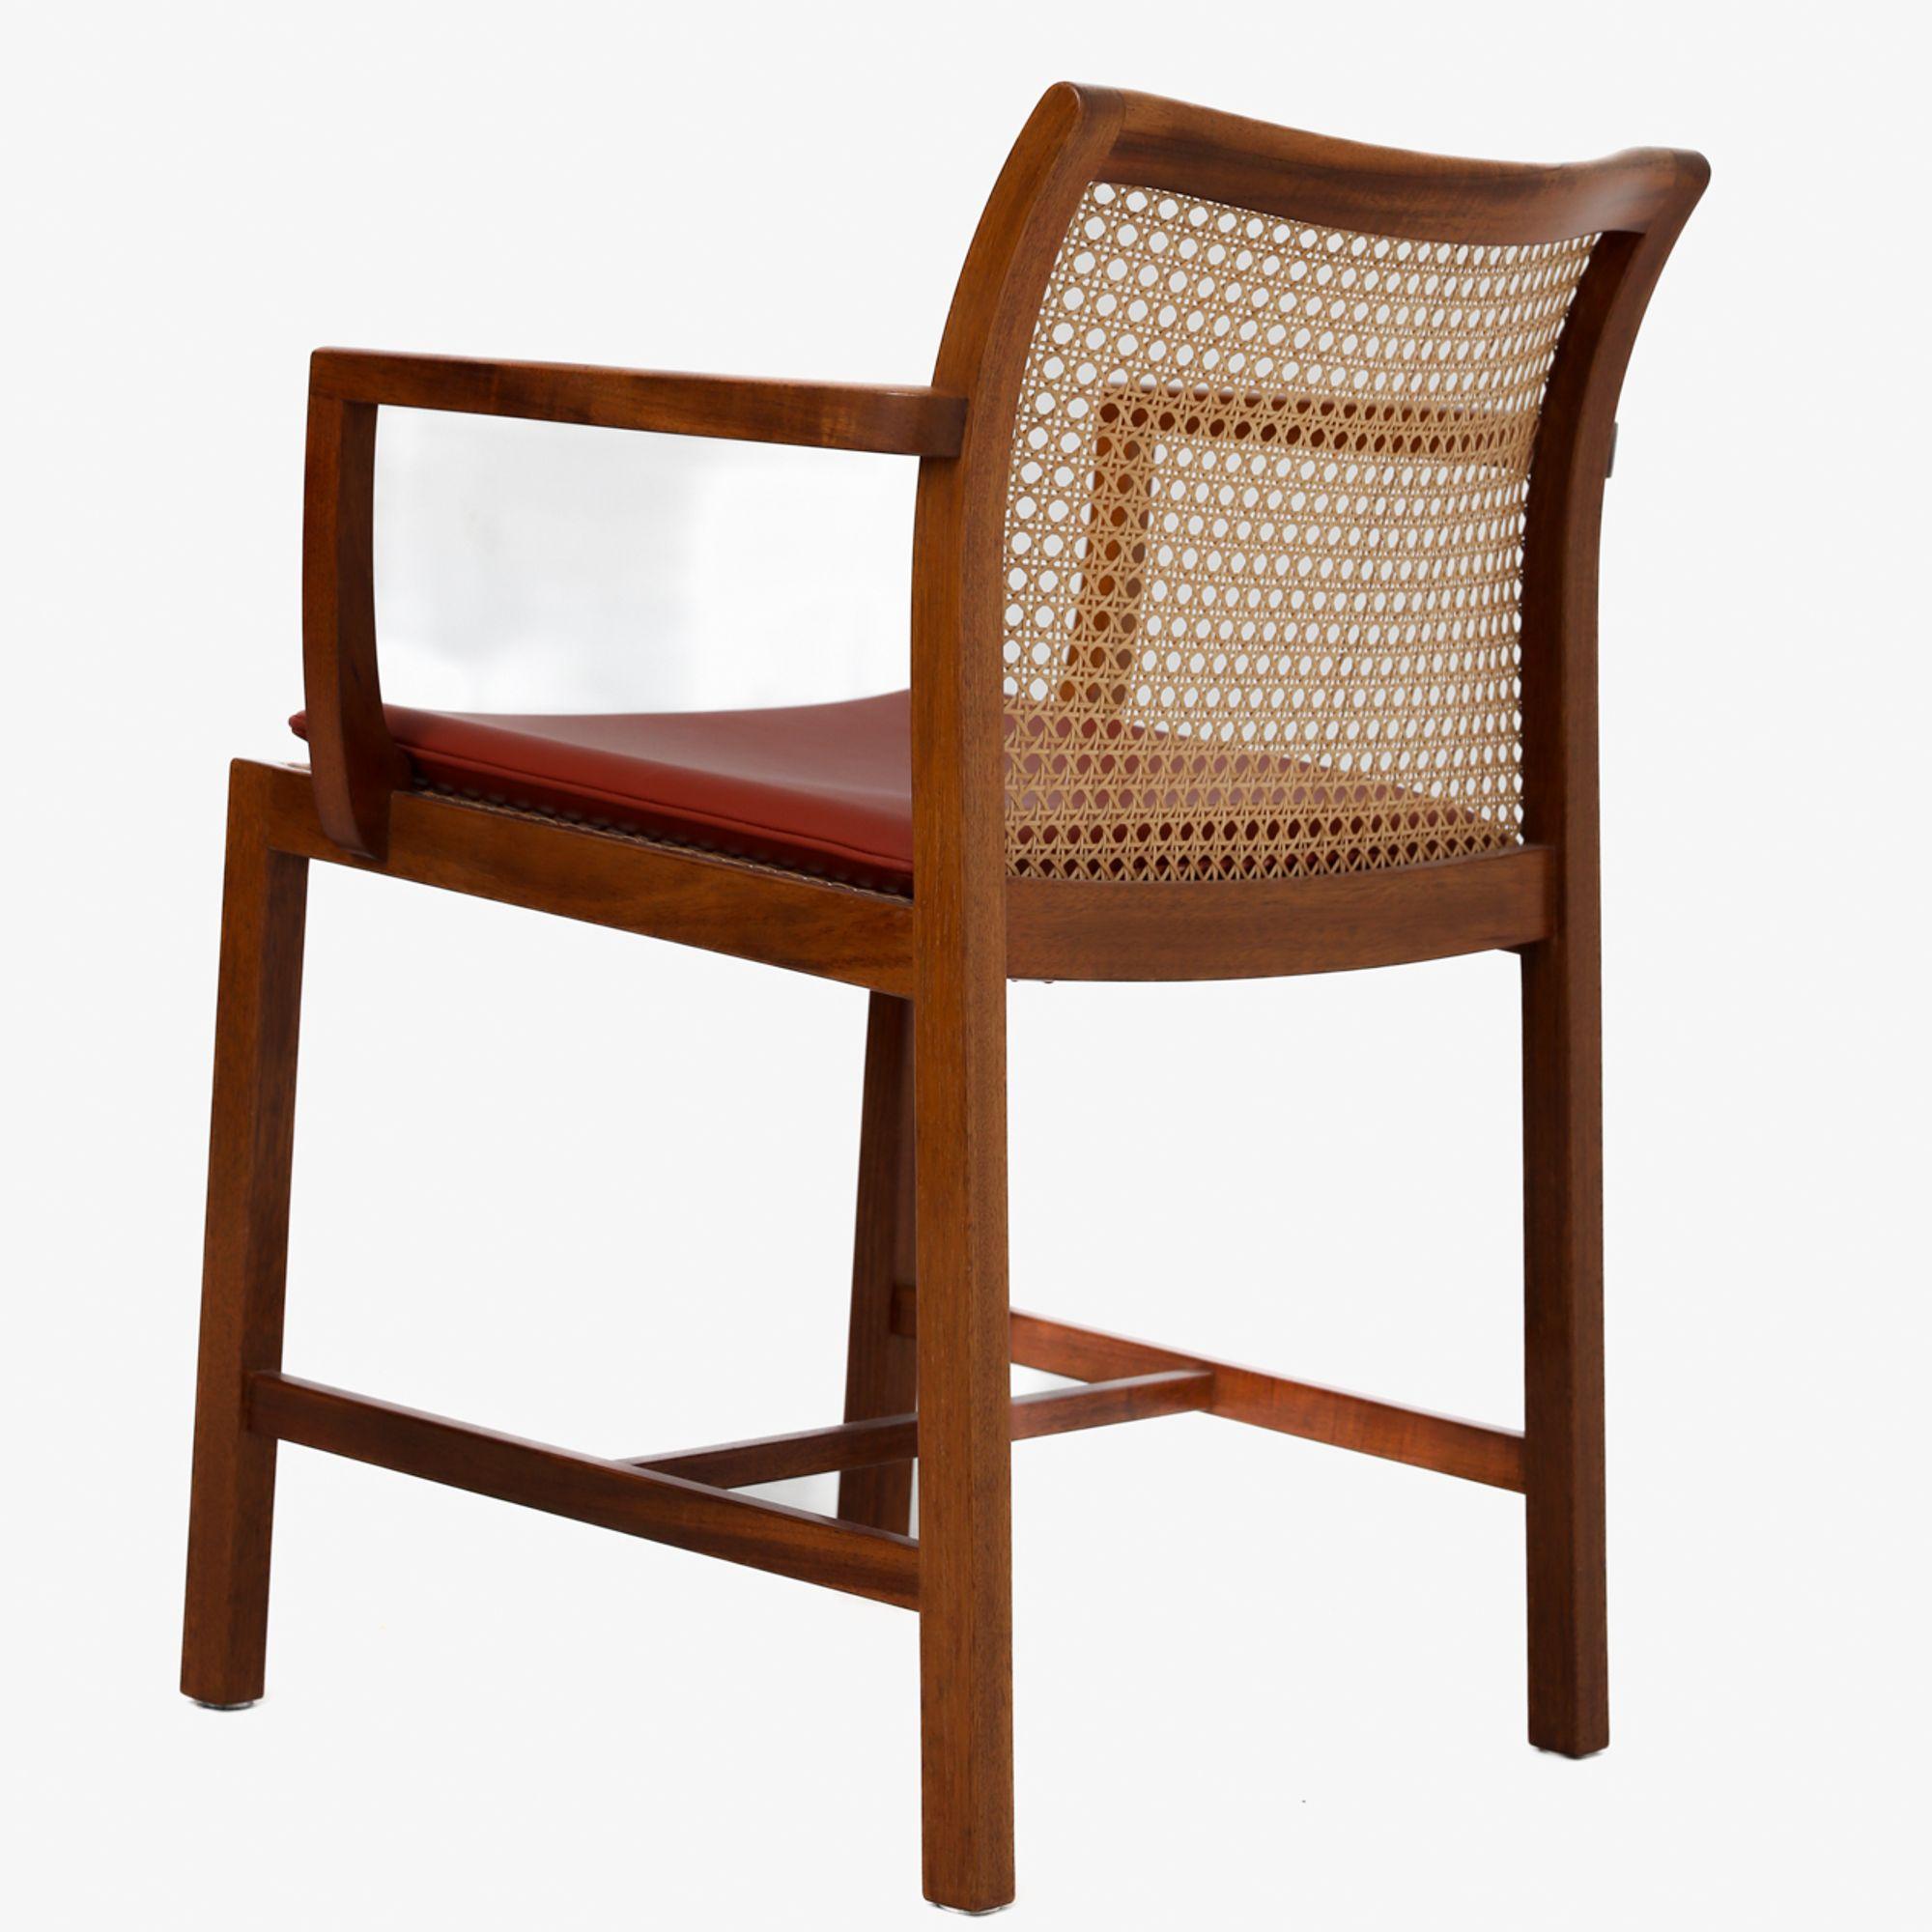 Armchair in solid mahogany with wicker and cushion in red leather. Ditte & Adrian Heath / Søren Horn.